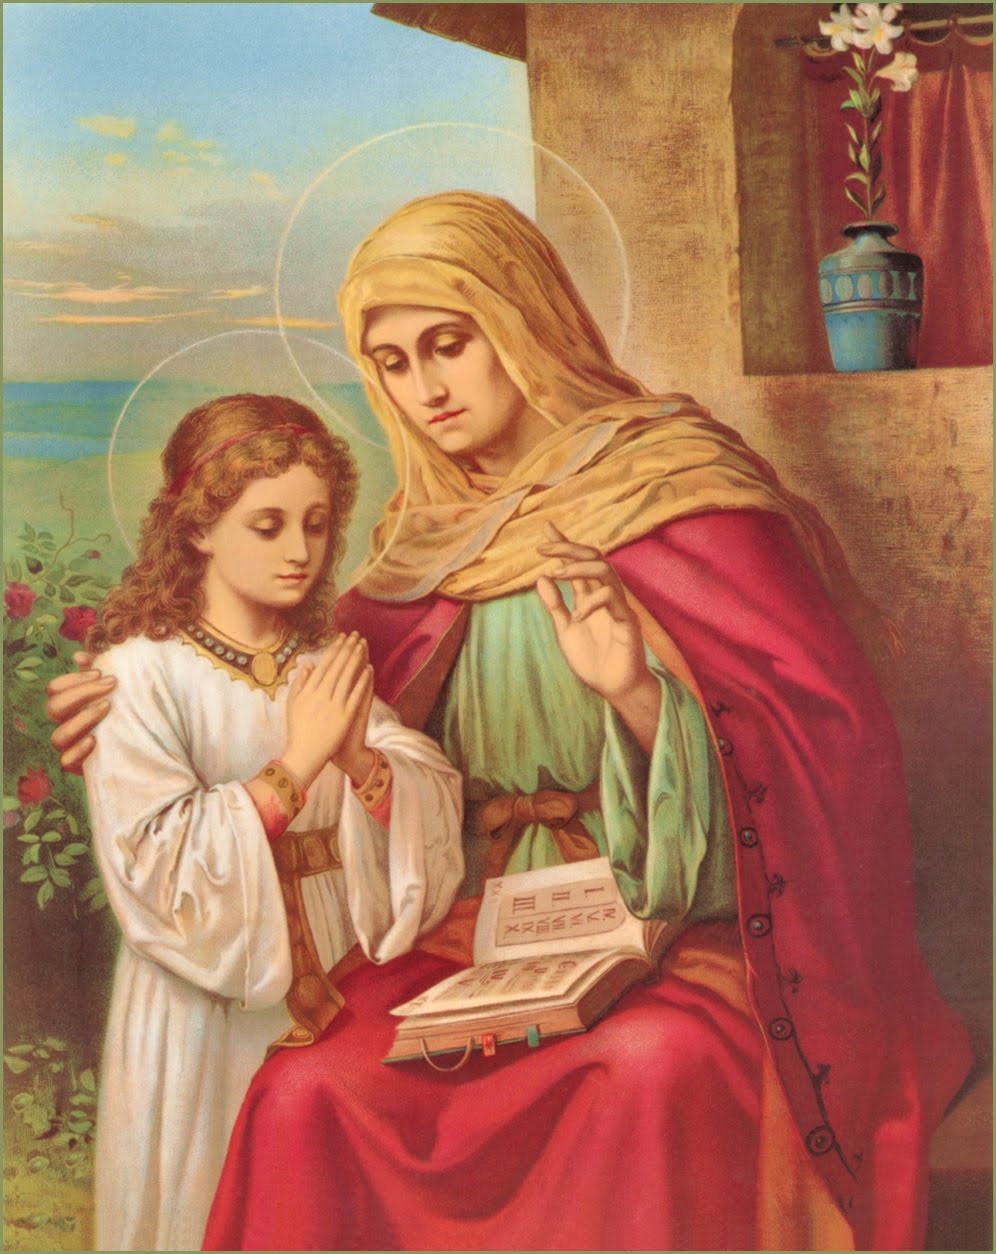 Blessed Virgin Mary and St. Anne, grandmother of Christ, pray for us!